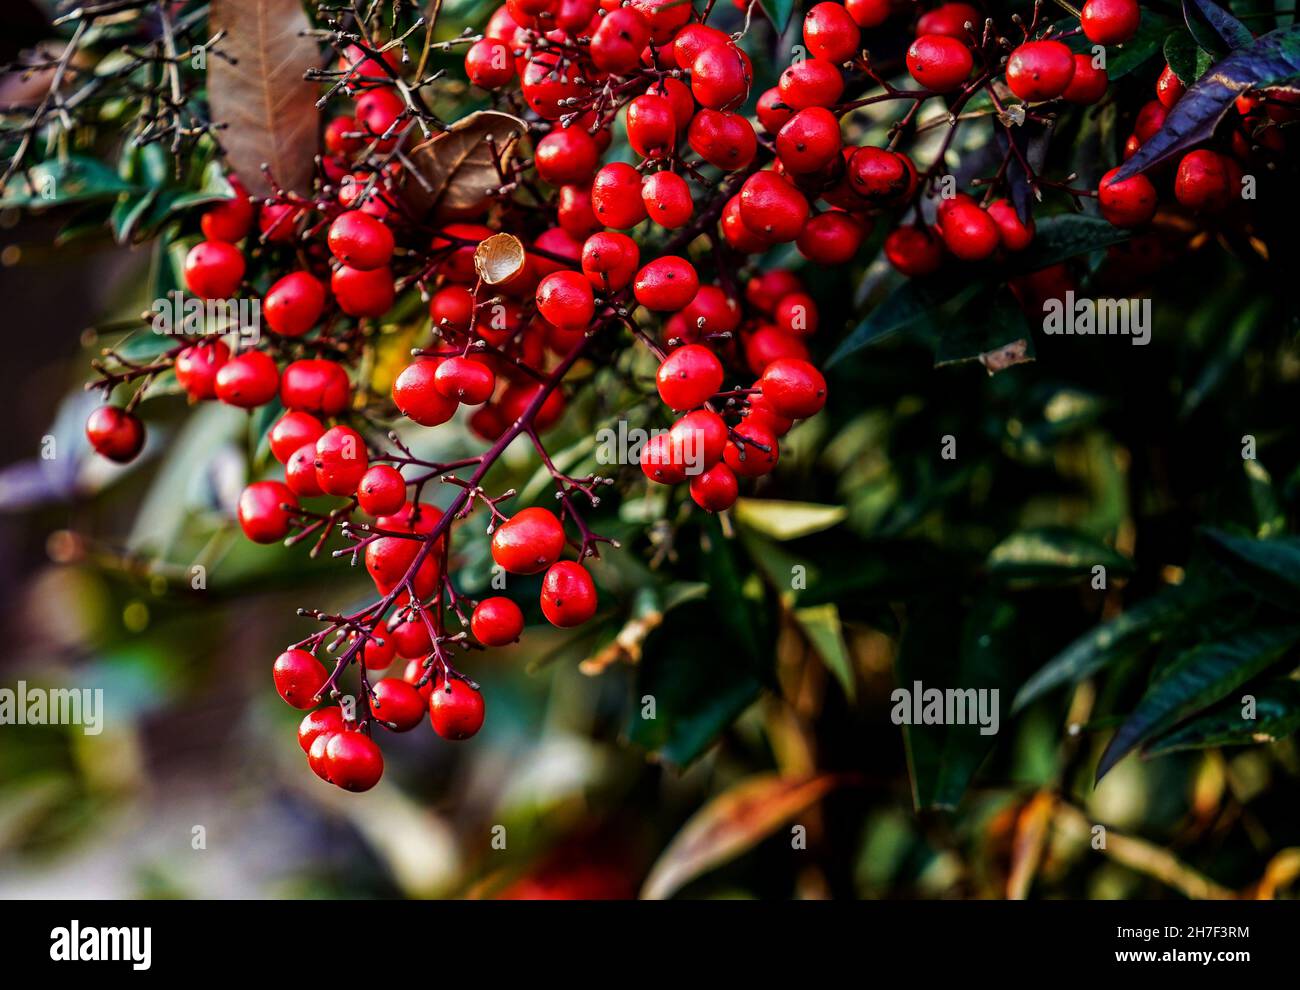 Red berries ripe and ready in November Stock Photo